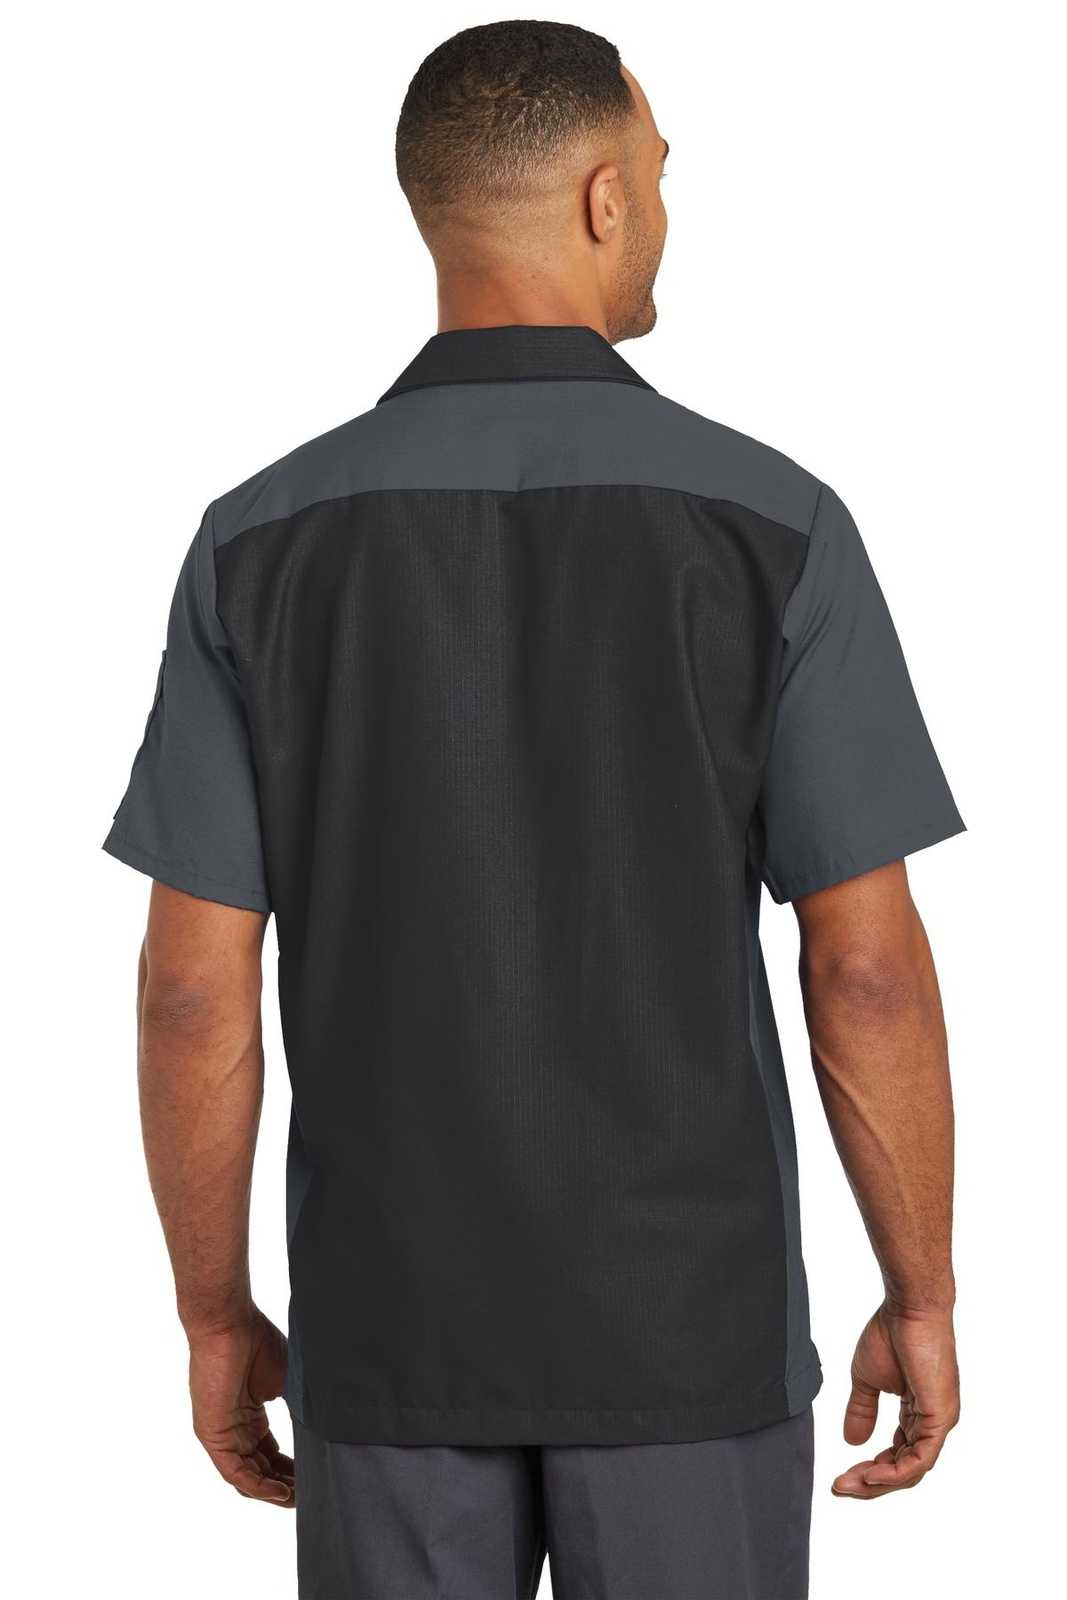 Red Kap SY20 Short Sleeve Ripstop Crew Shirt - Black/ Charcoal - HIT a Double - 1